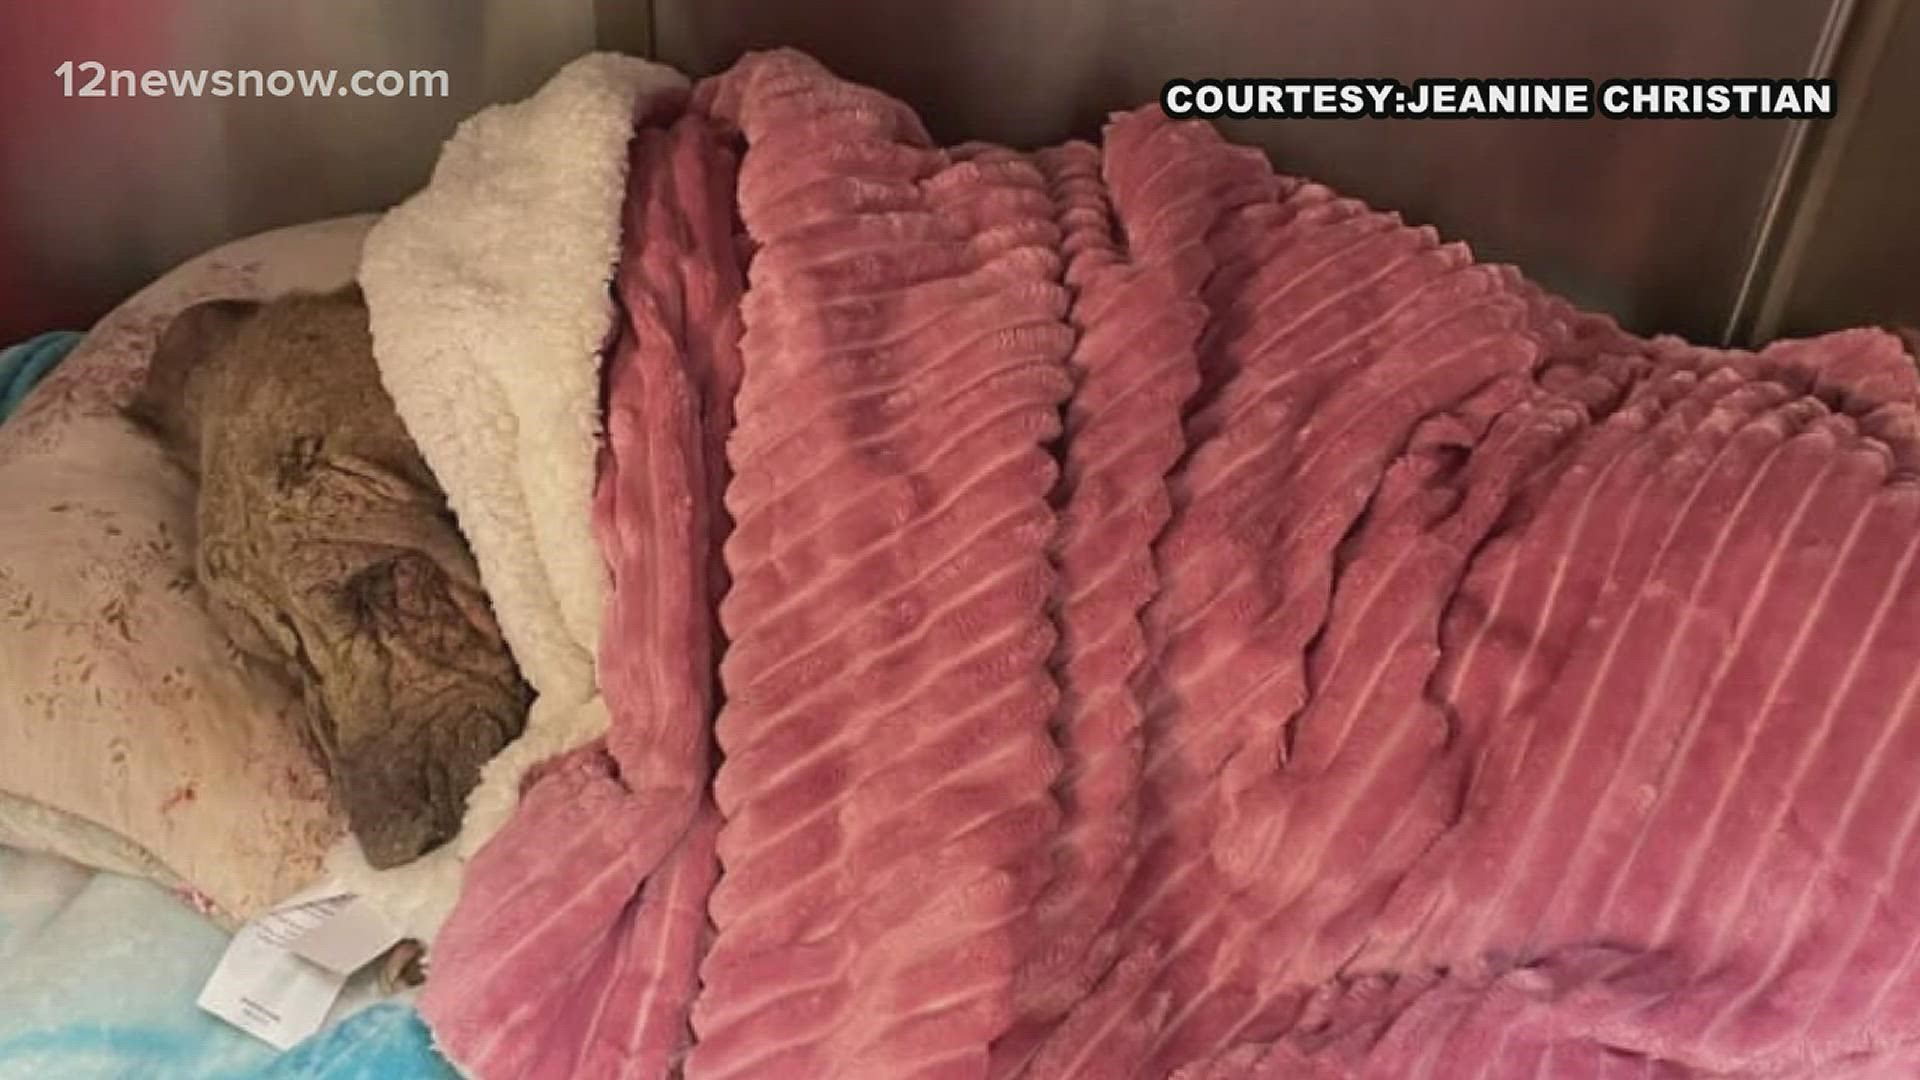 A dog is fighting for her life after being found malnourished and sick in an empty Texas field.